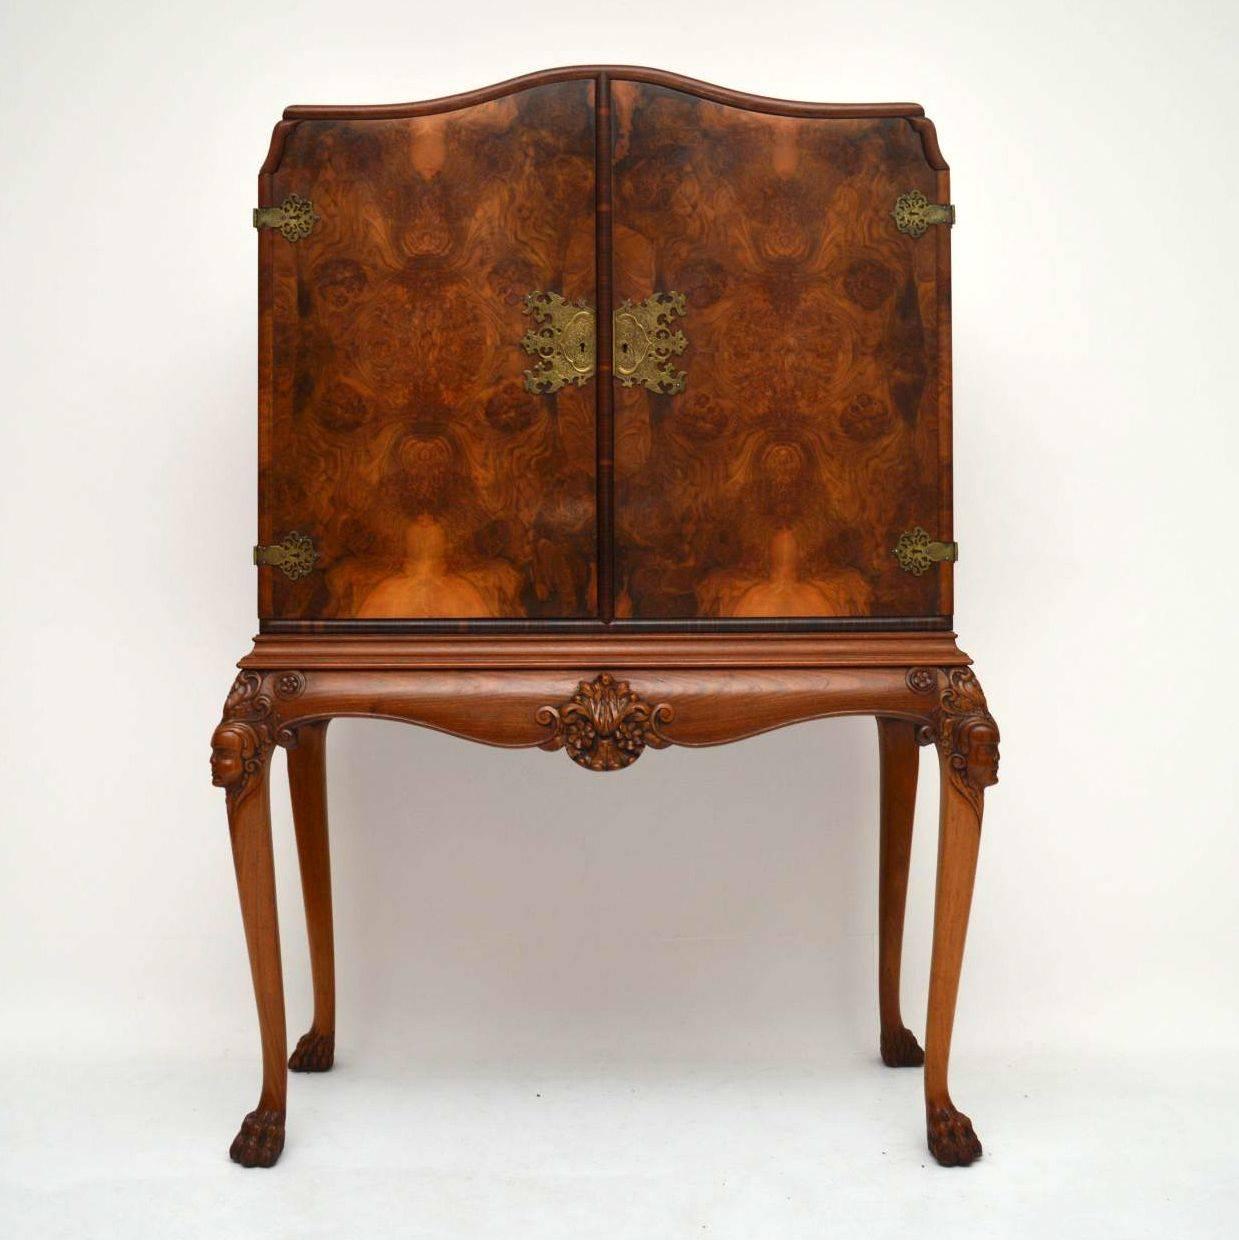 This antique walnut drinks cabinet is wonderful quality & a great looking piece with some amazing details. The upper section has a well shaped top, with two burr walnut doors & figured walnut sides. The figuring one the wood is stunning & the colour